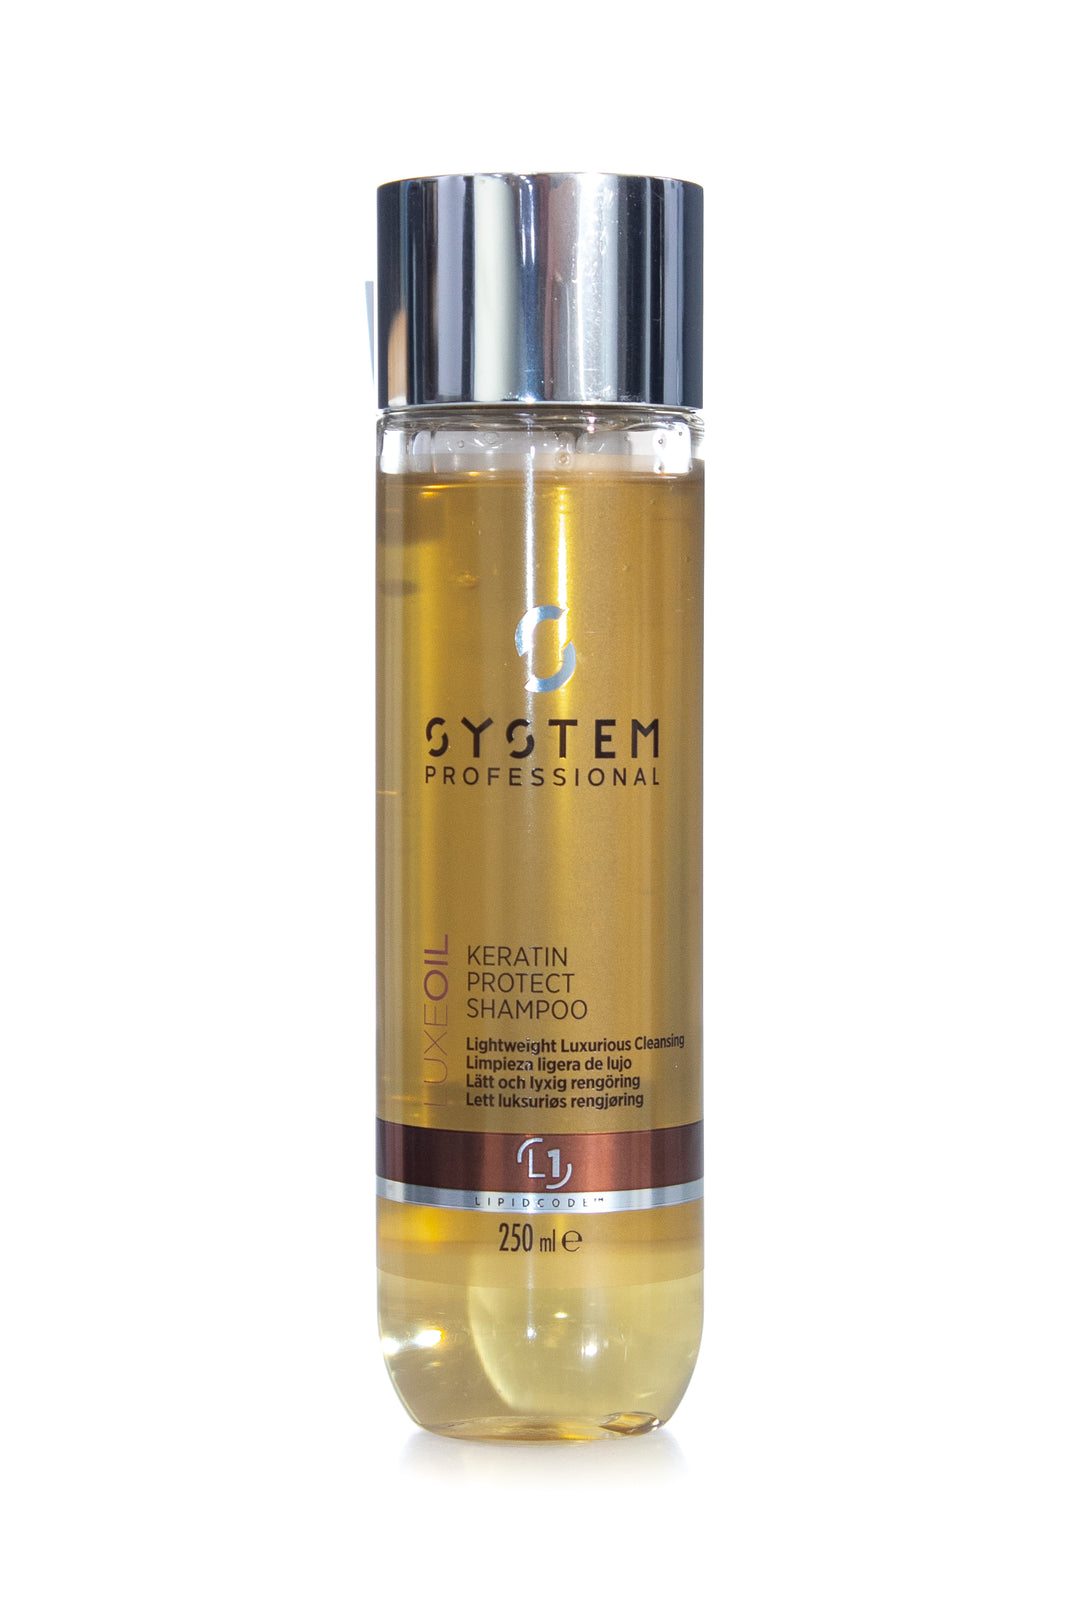 SYSTEM PROFESSIONAL Luxe Oil Keratin Protect Shampoo  | 250ml